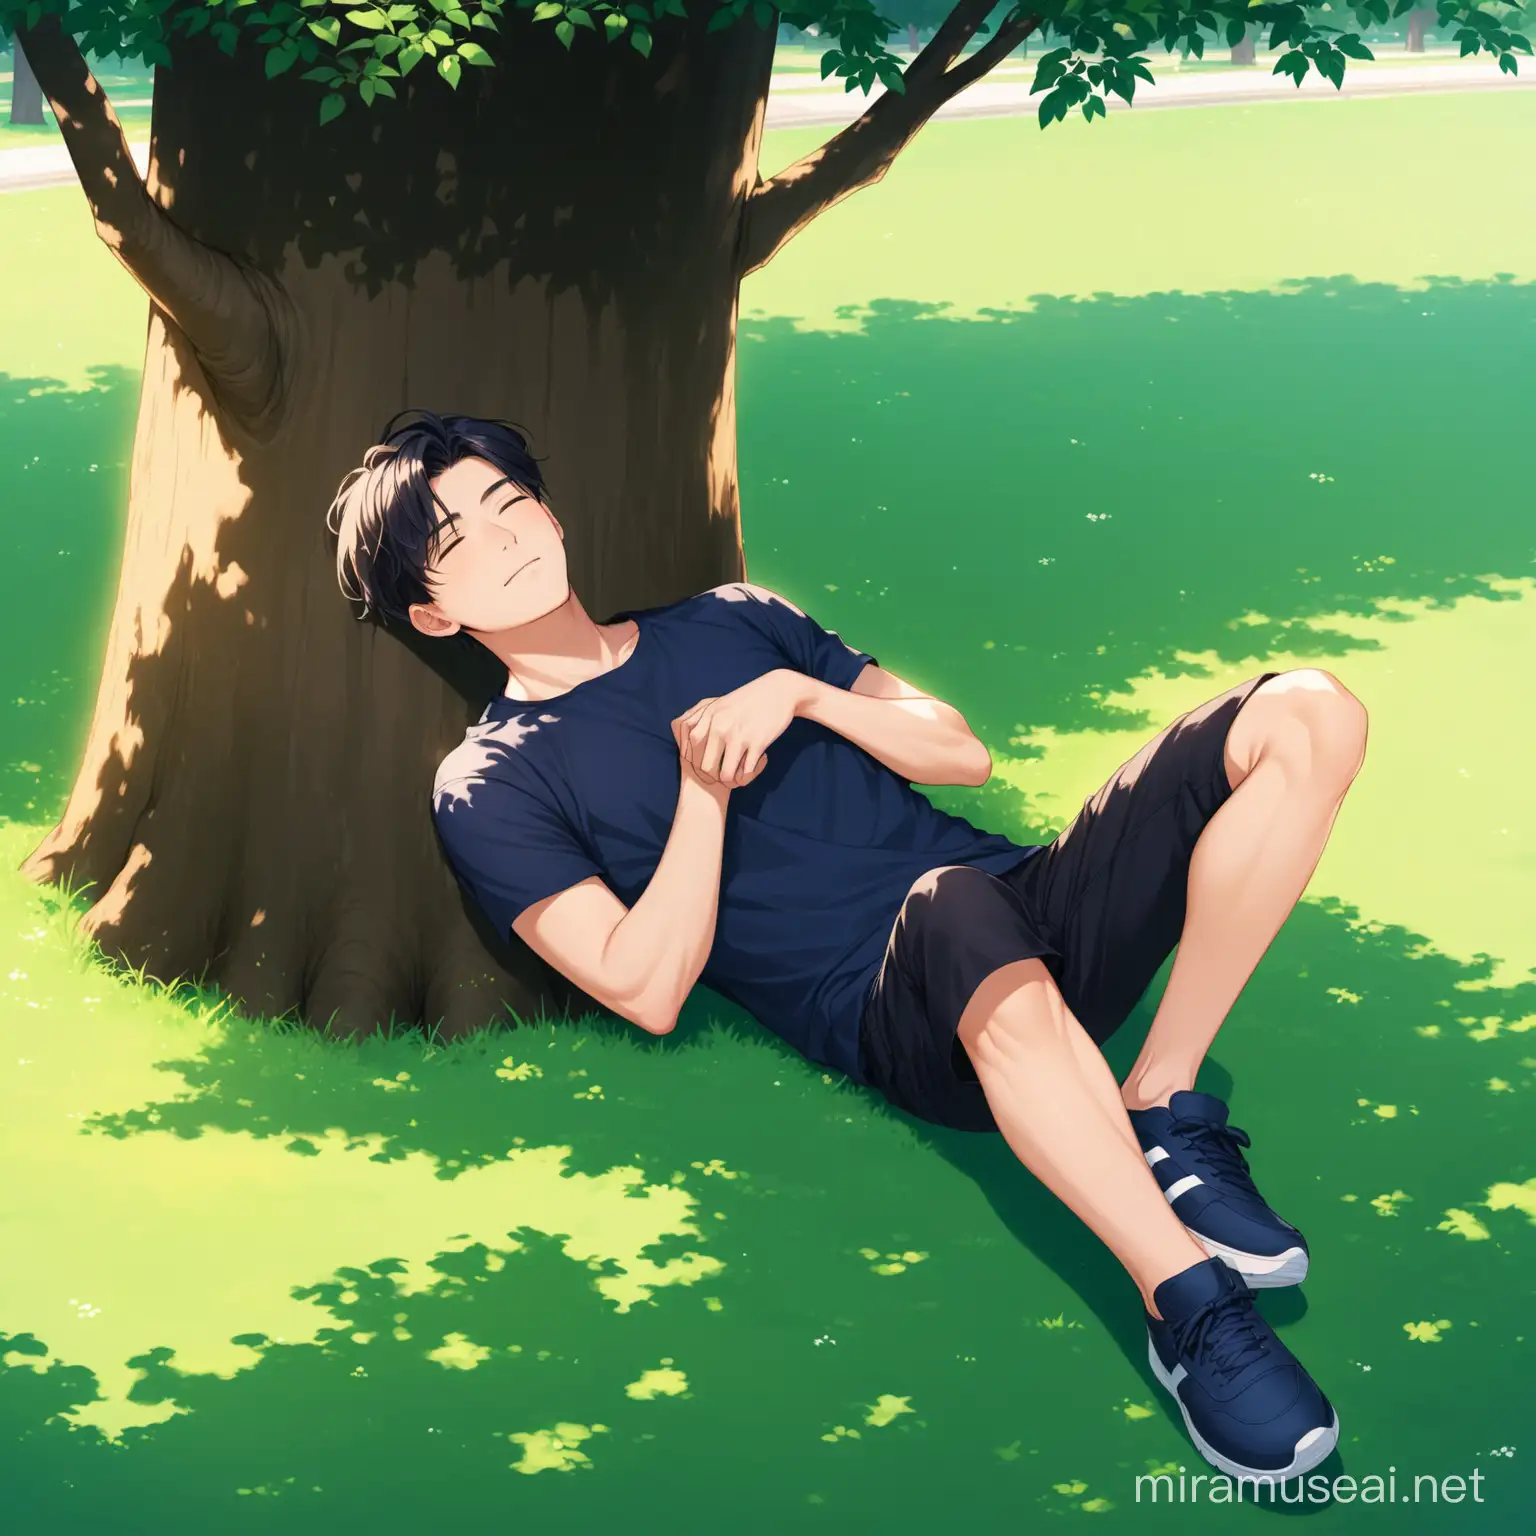 The background is the park lawn.

A 20-year-old handsome man is resting on his back against a tree.

The handsome man wore a navy t-shirt and black cotton pants and black sneakers.

It's a peaceful atmosphere.